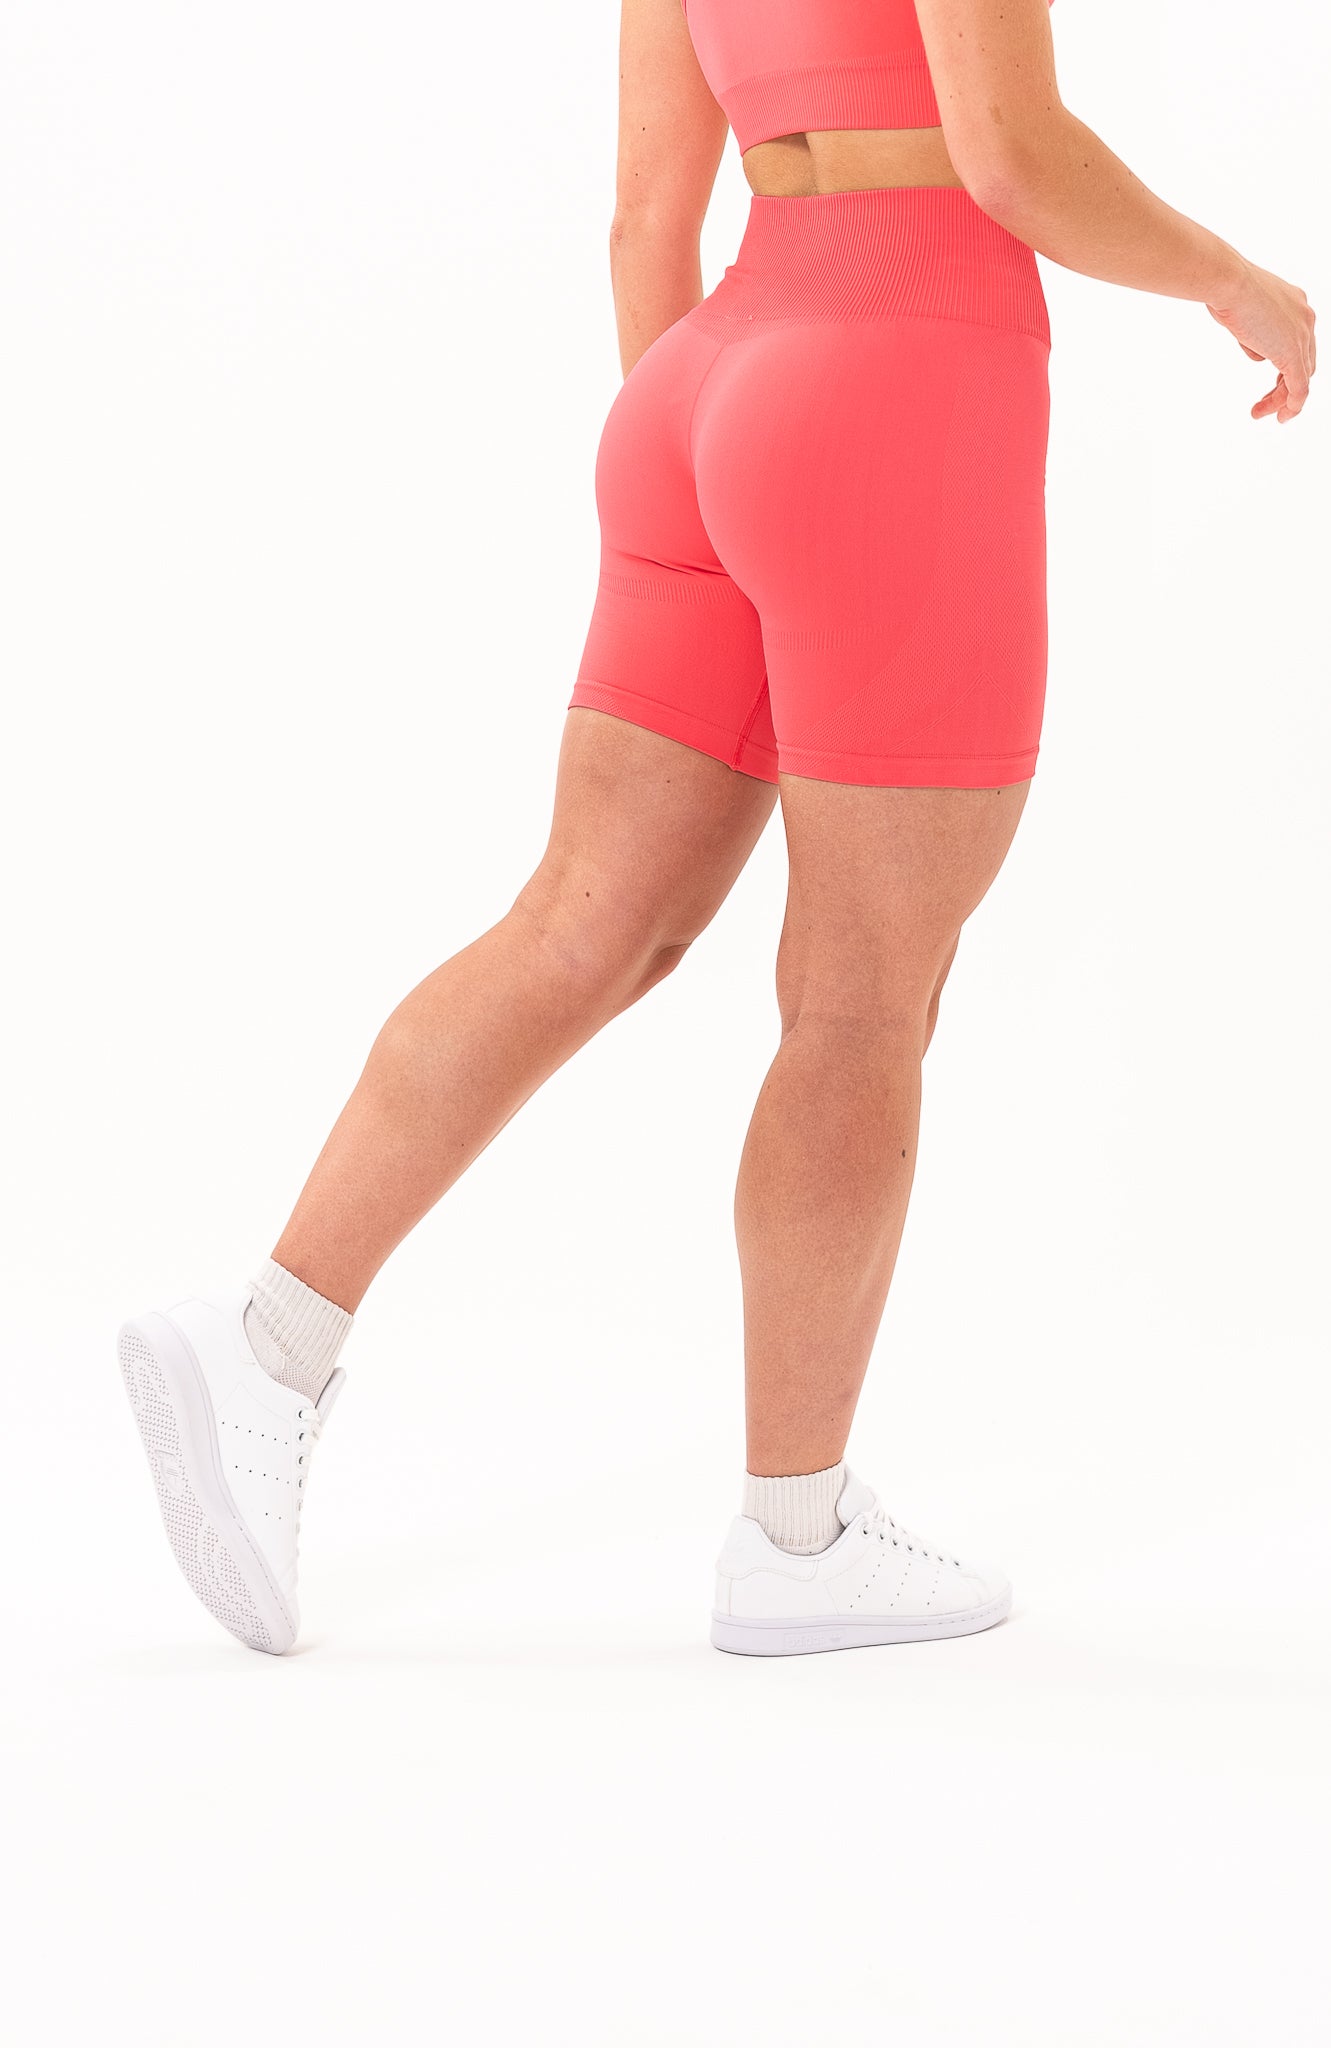 redbaysand Women's seamless Limitless high waisted cycle shorts in coral pink – Squat proof 5 inch inseam leg bum enhancing shorts for Gym workouts training, Running, yoga, bodybuilding and bikini fitness.